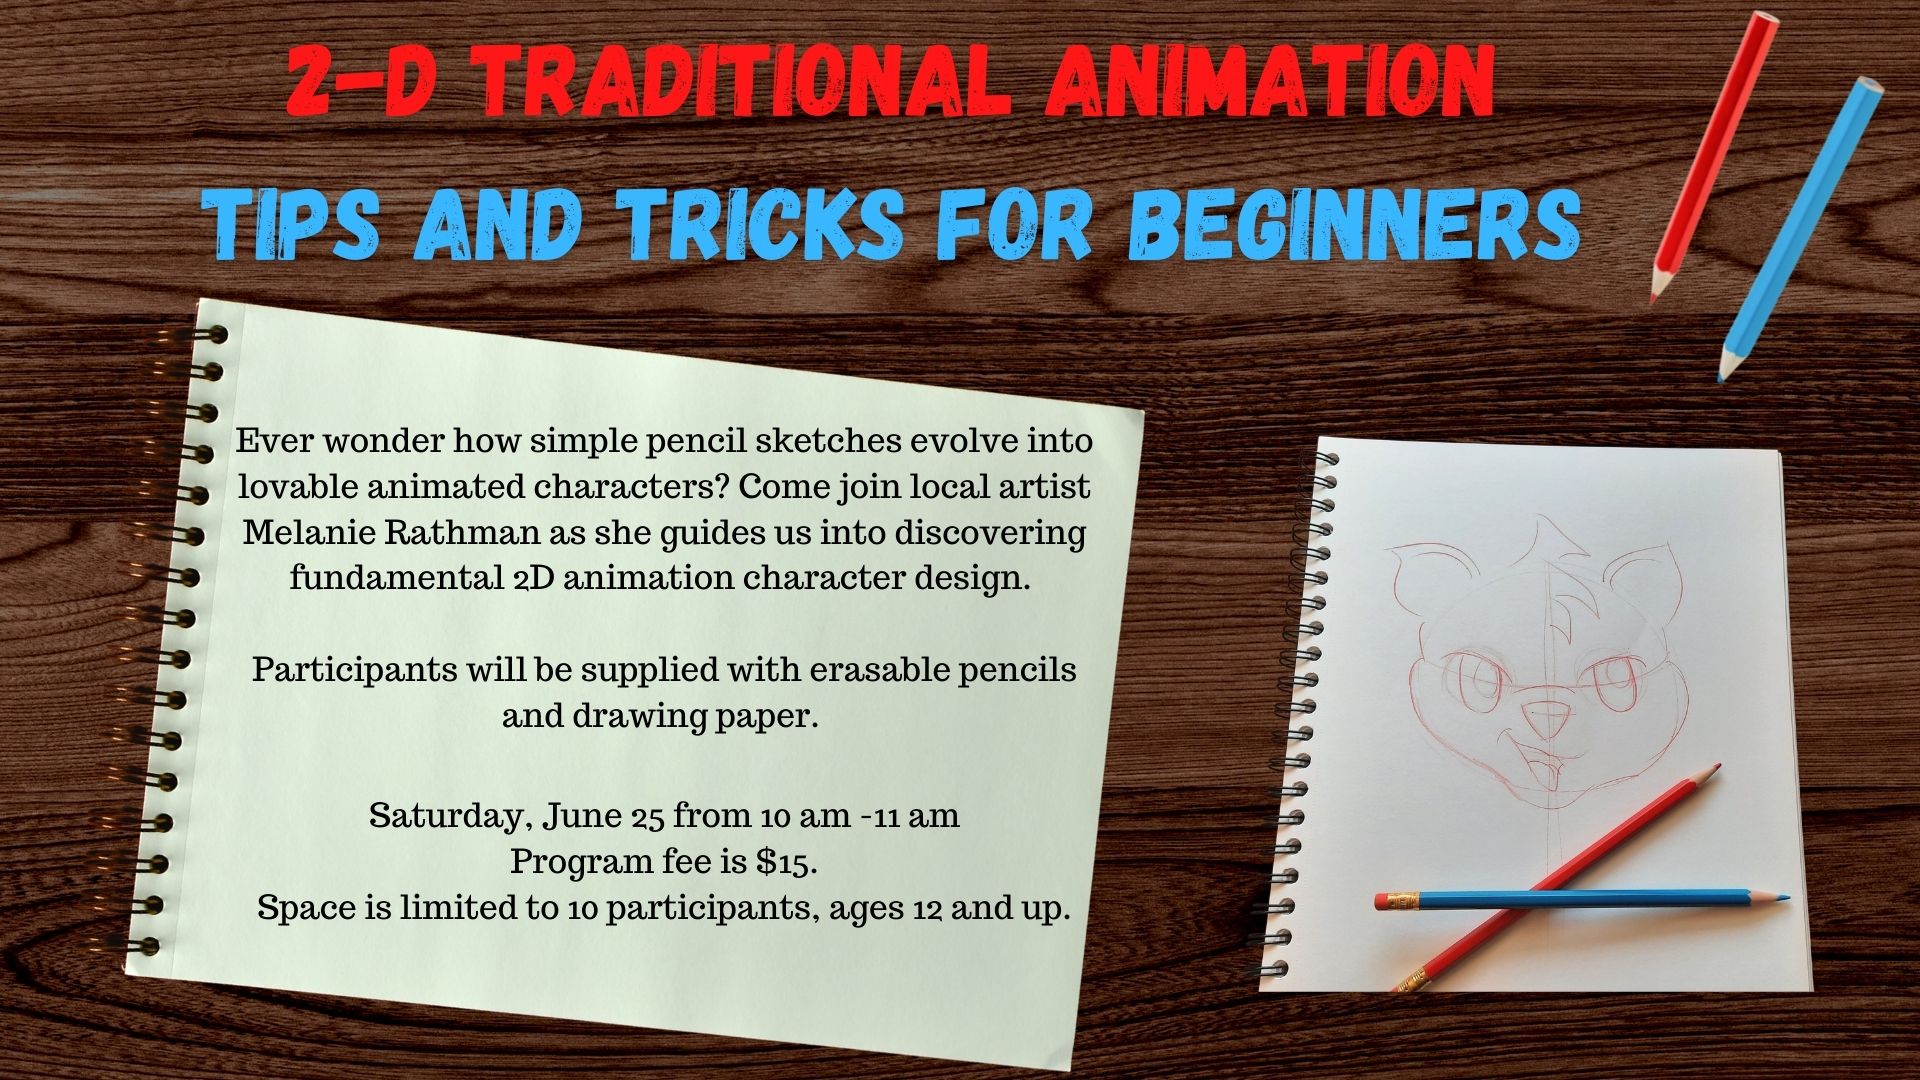 Flyer for 2D Traditional Animation program